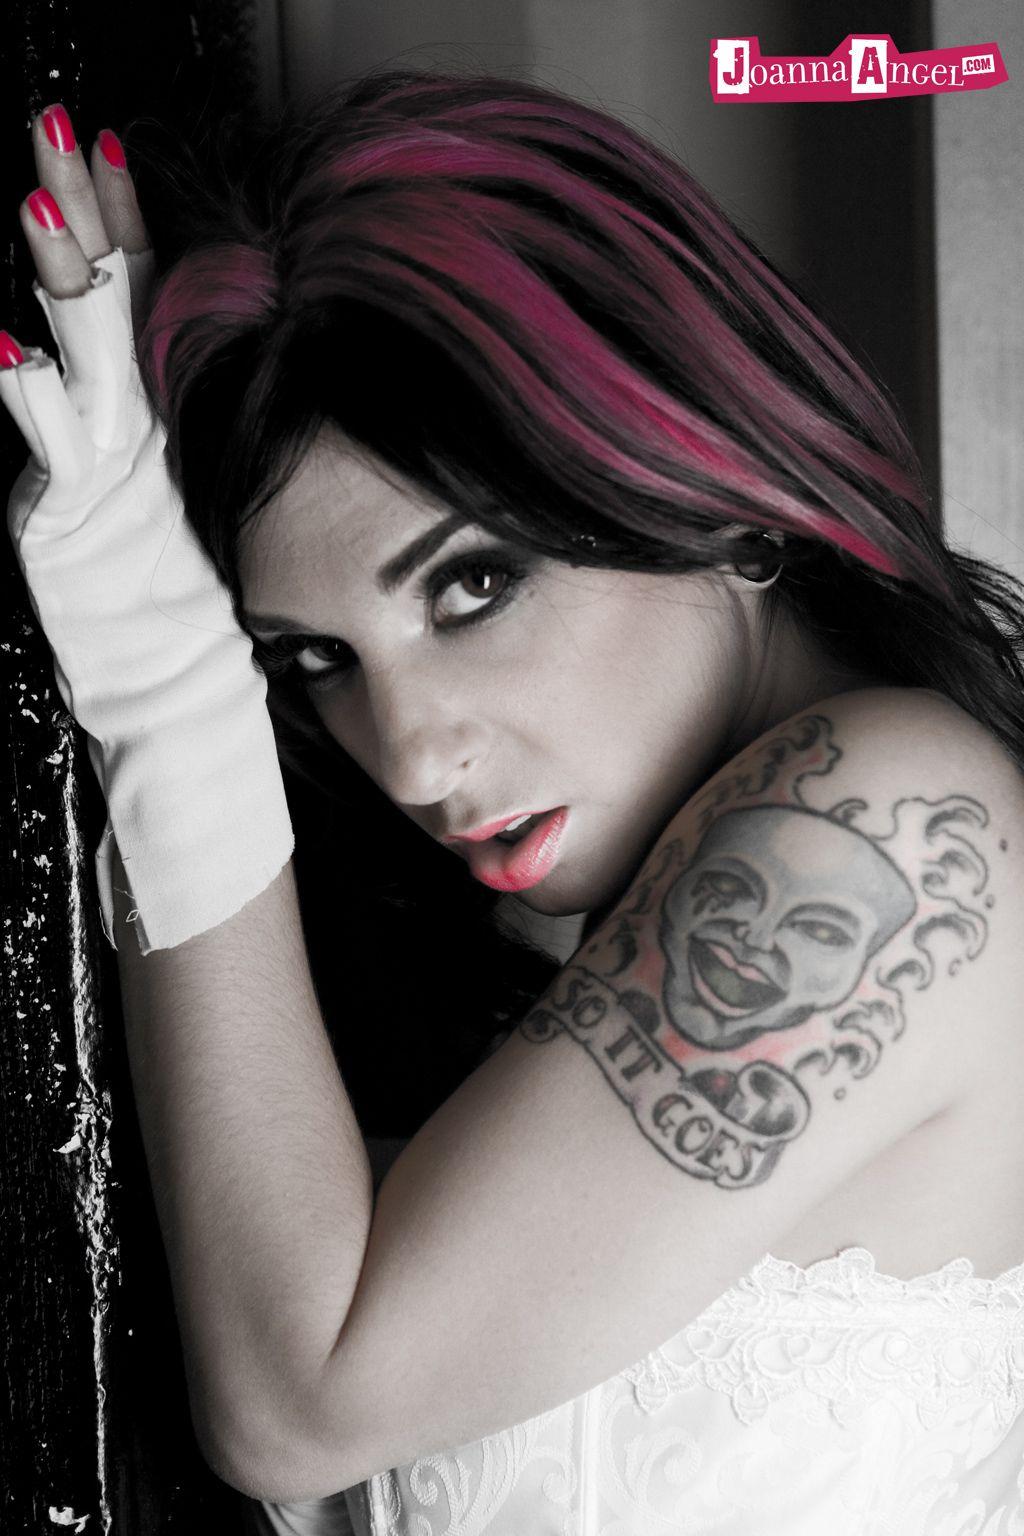 Pictures of Joanna Angel giving you some b&w gothic glam #55530118